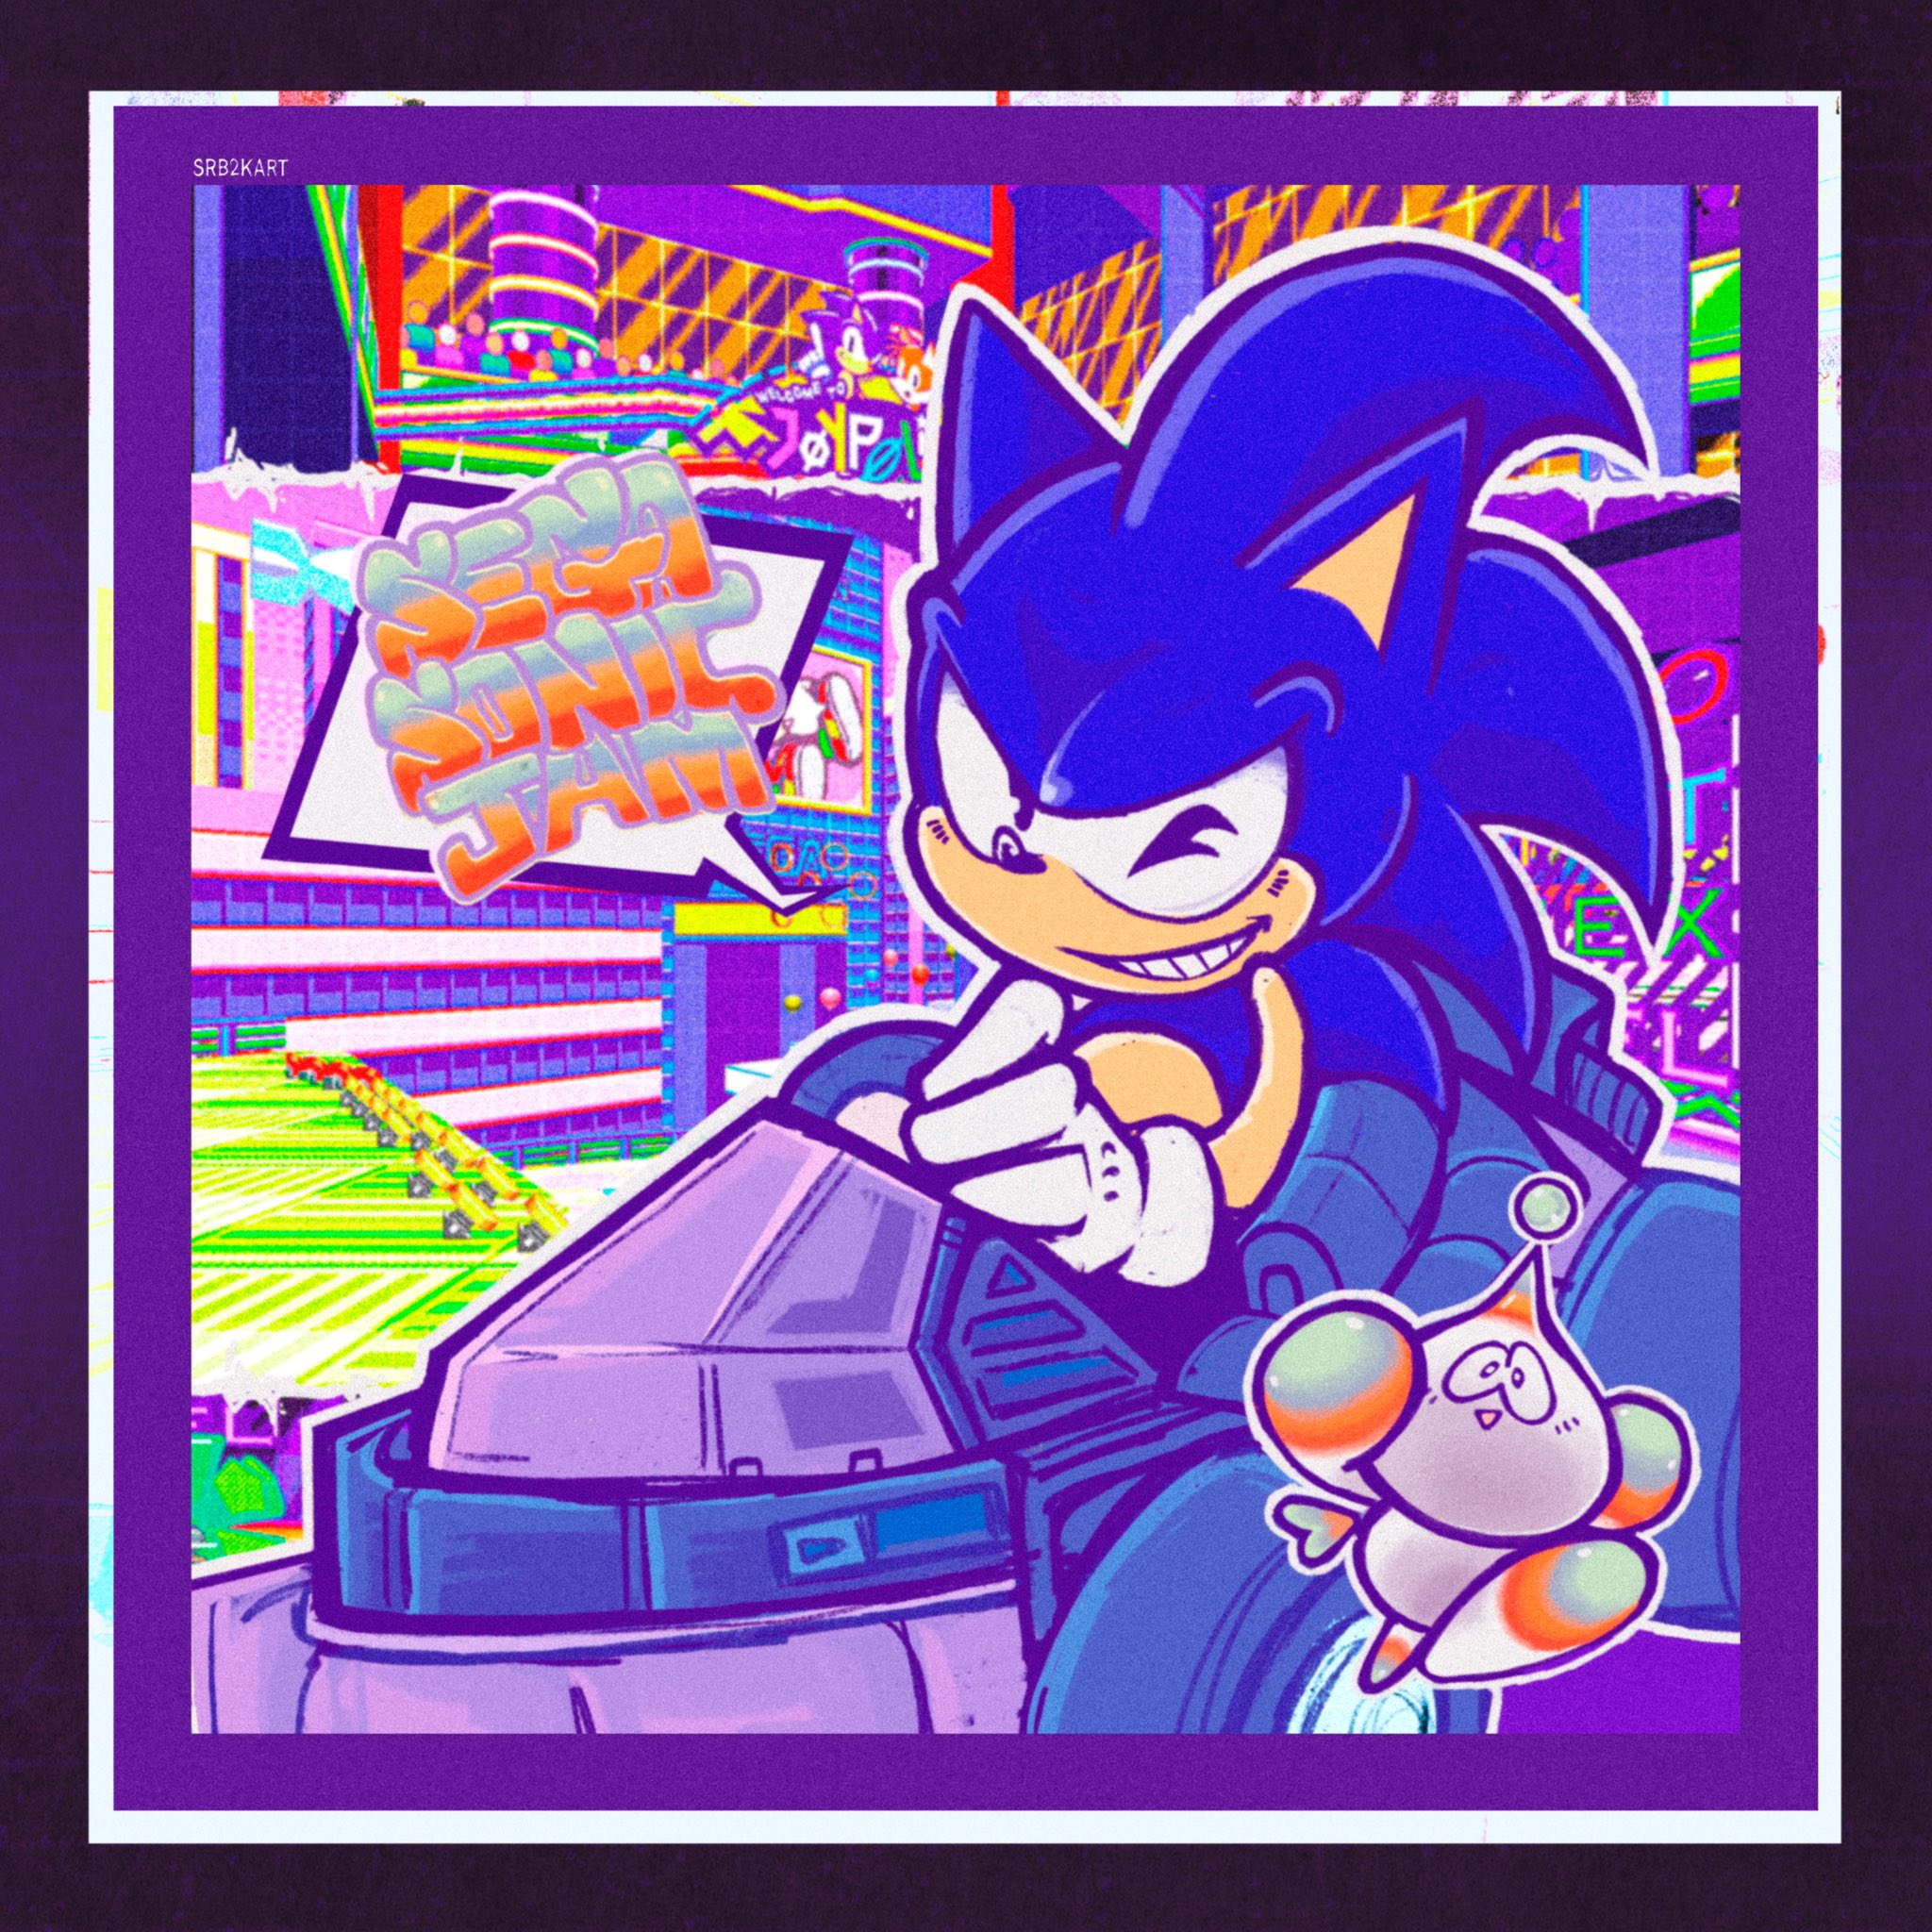 Fleetway Sonic is posting to in srb2 2.2